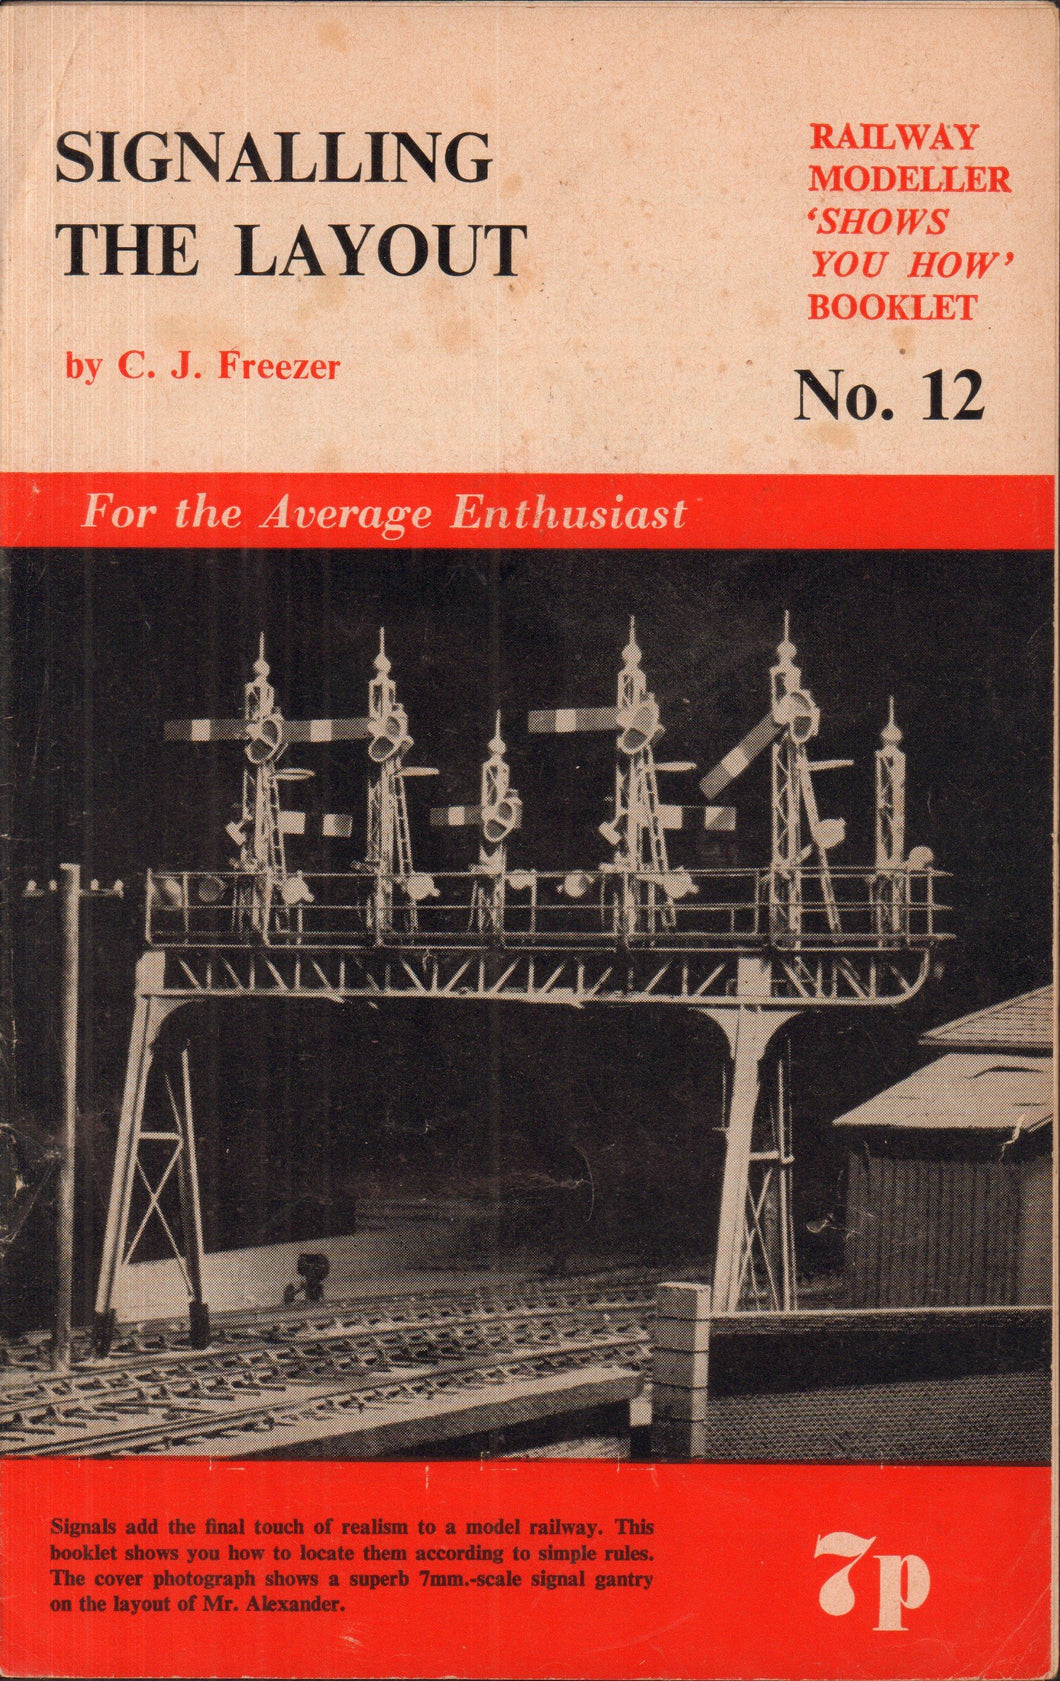 Signalling the layout ('Railway Modeller'. Shows you how booklets;no.12) Freezer, C. J